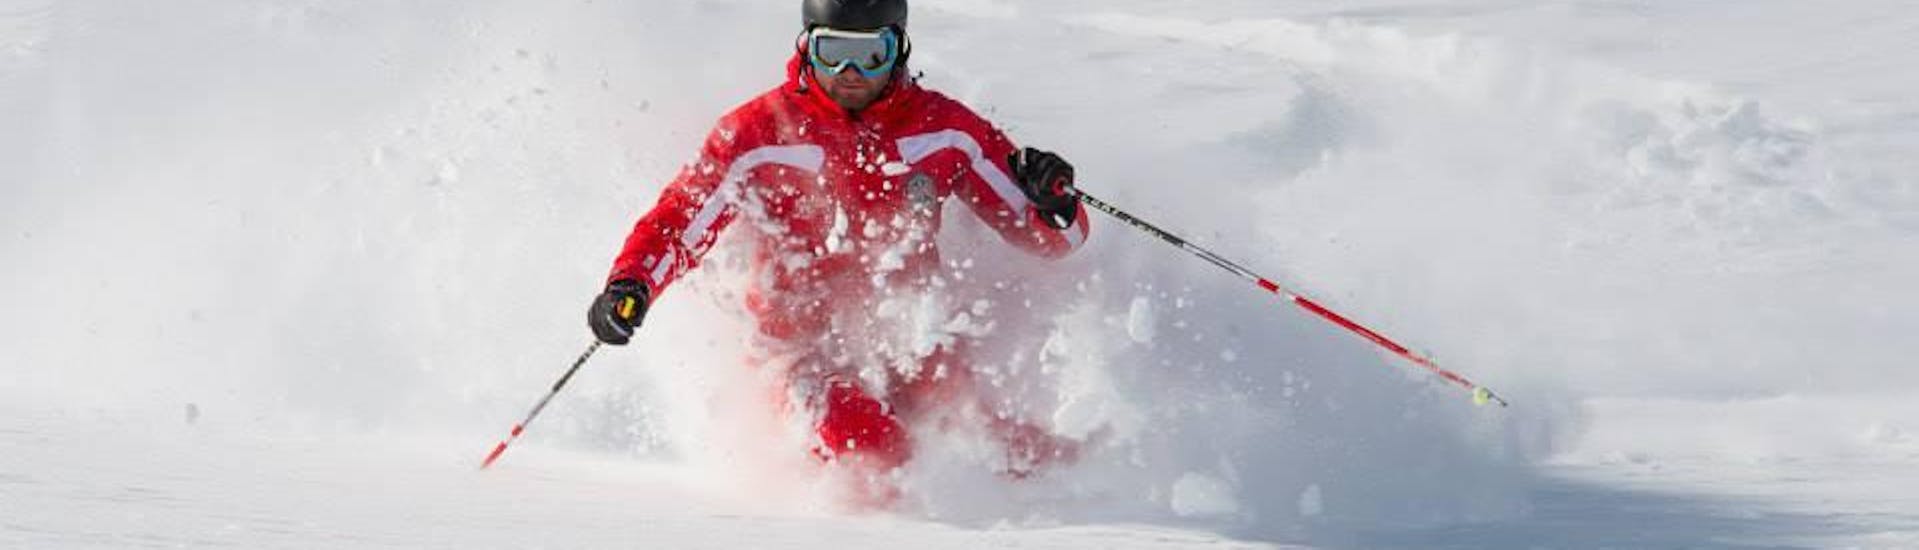 Ski instructor in the snow at Speikboden - Campo Tures (Sand in Taufers) - Private Off-Piste Skiing Lessons for All Levels.